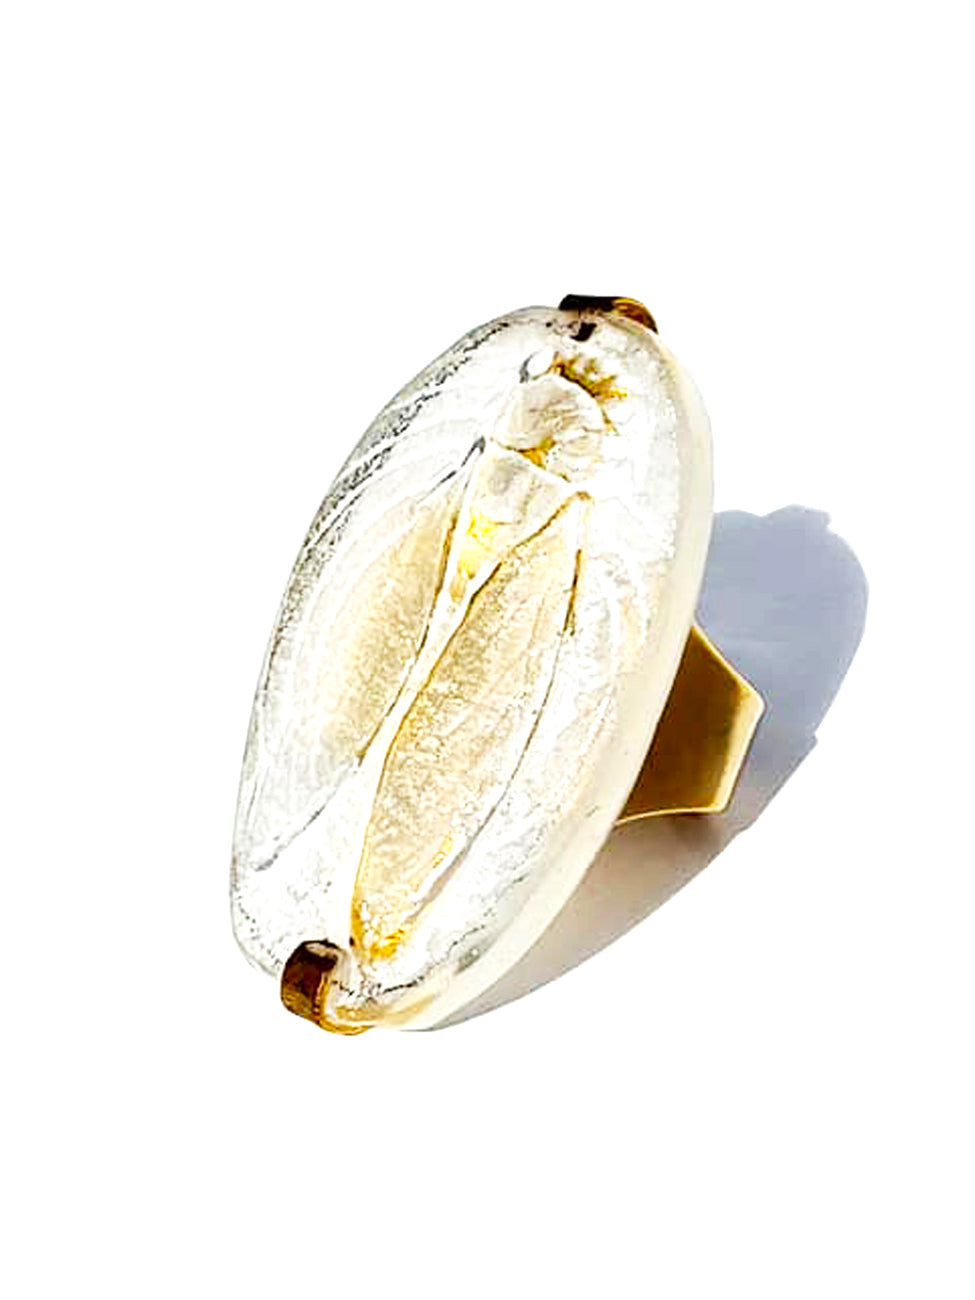 Ring Hand Cast French Glass Beetle Oval Gold Plated Band